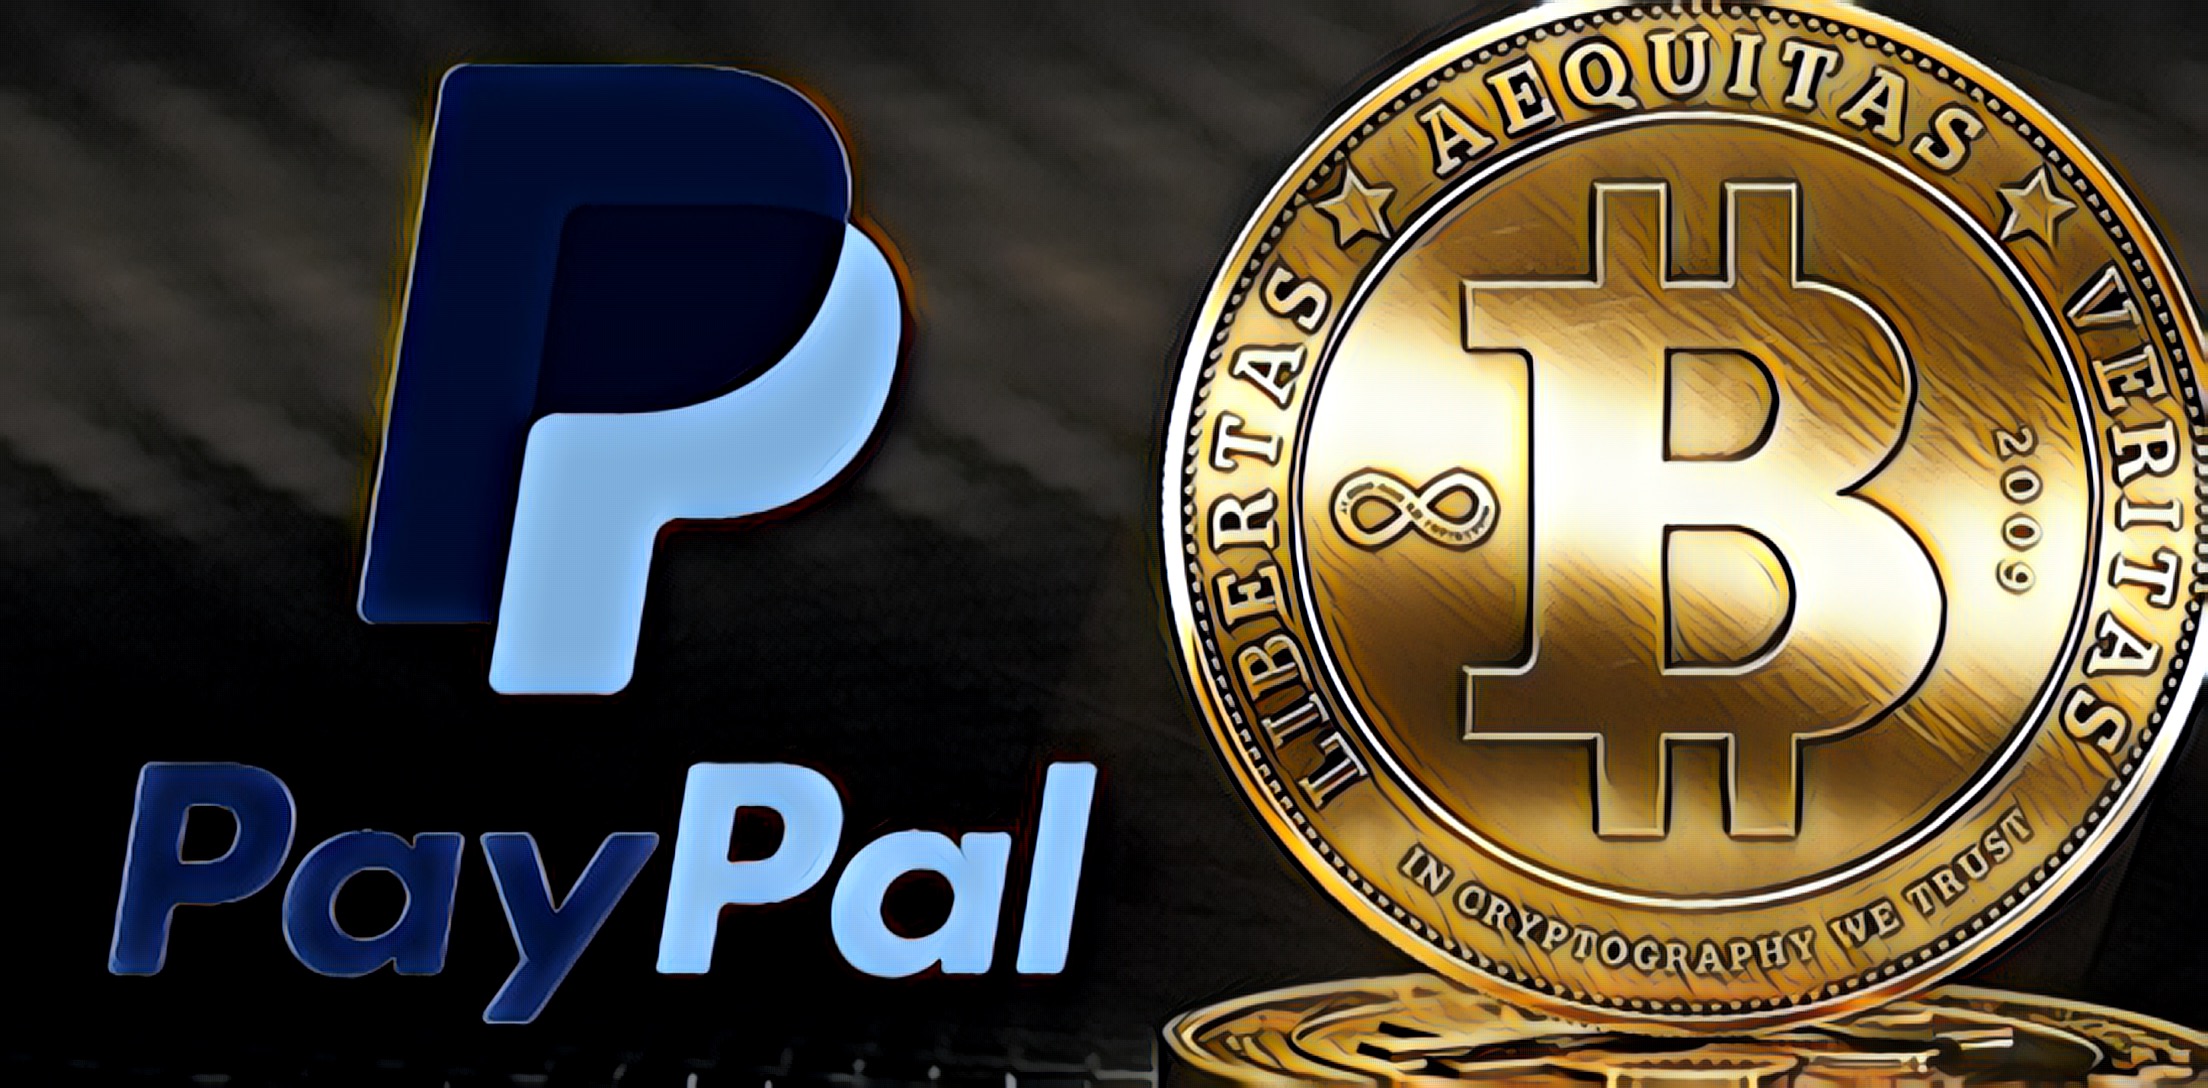 Paypal bitcoins best cryptocurrency wallt